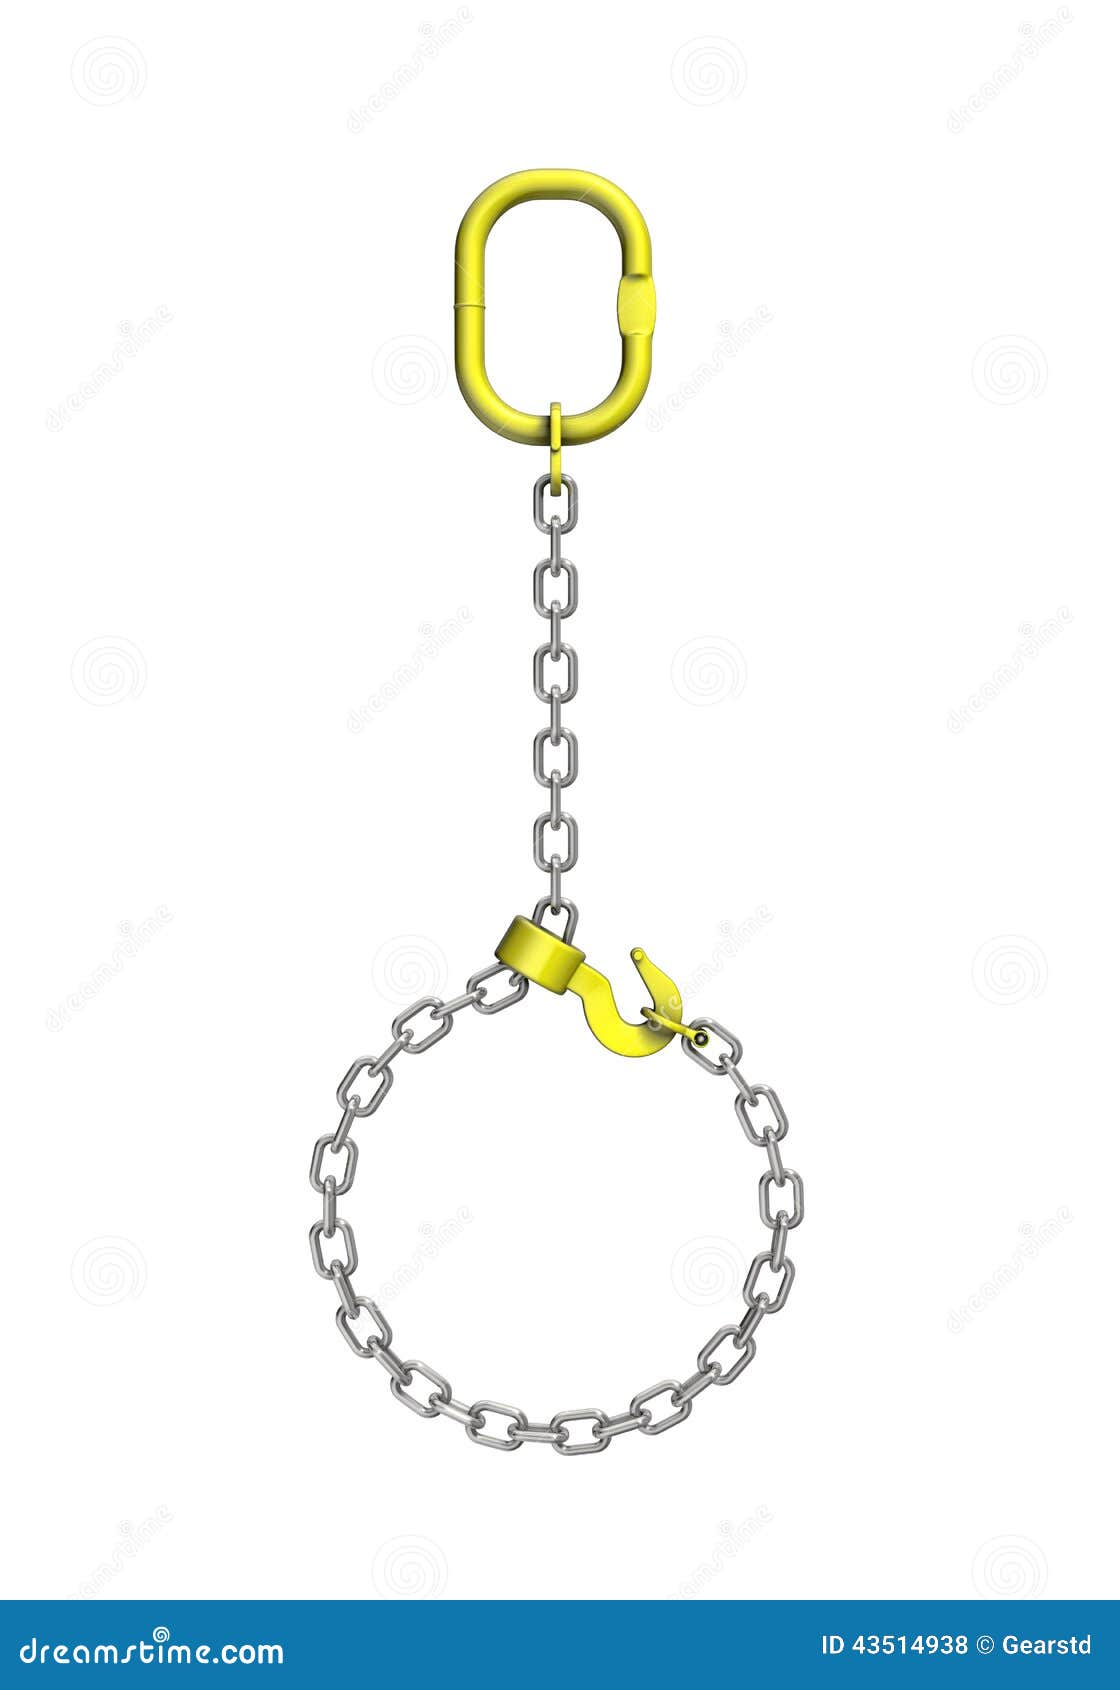 Cargo Strapping: Metal Chain Stock Illustration - Illustration of ...